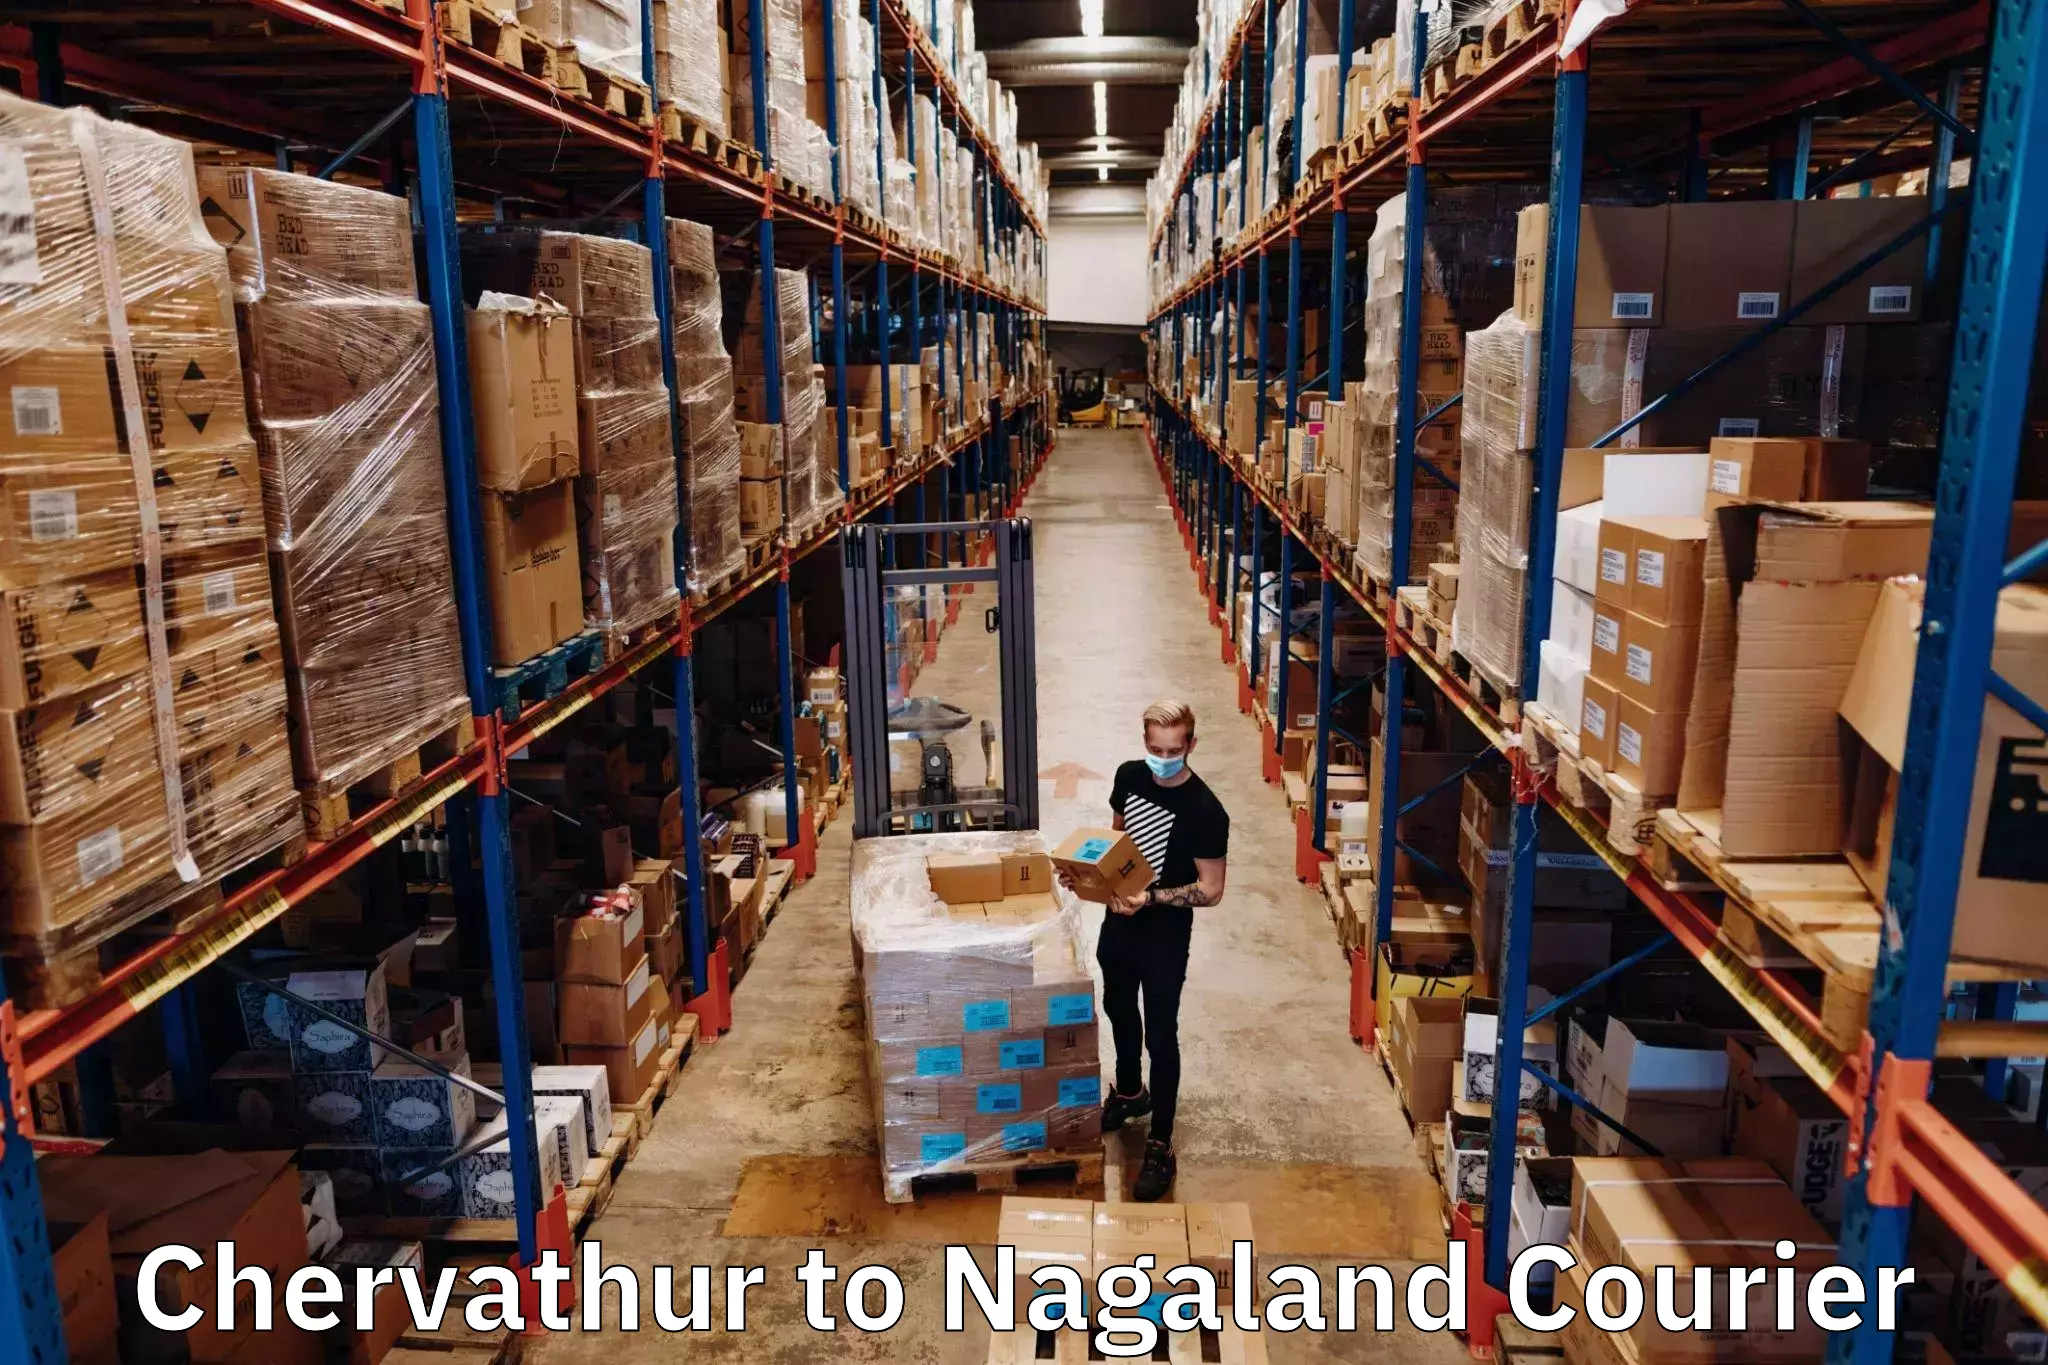 Global shipping networks Chervathur to Nagaland